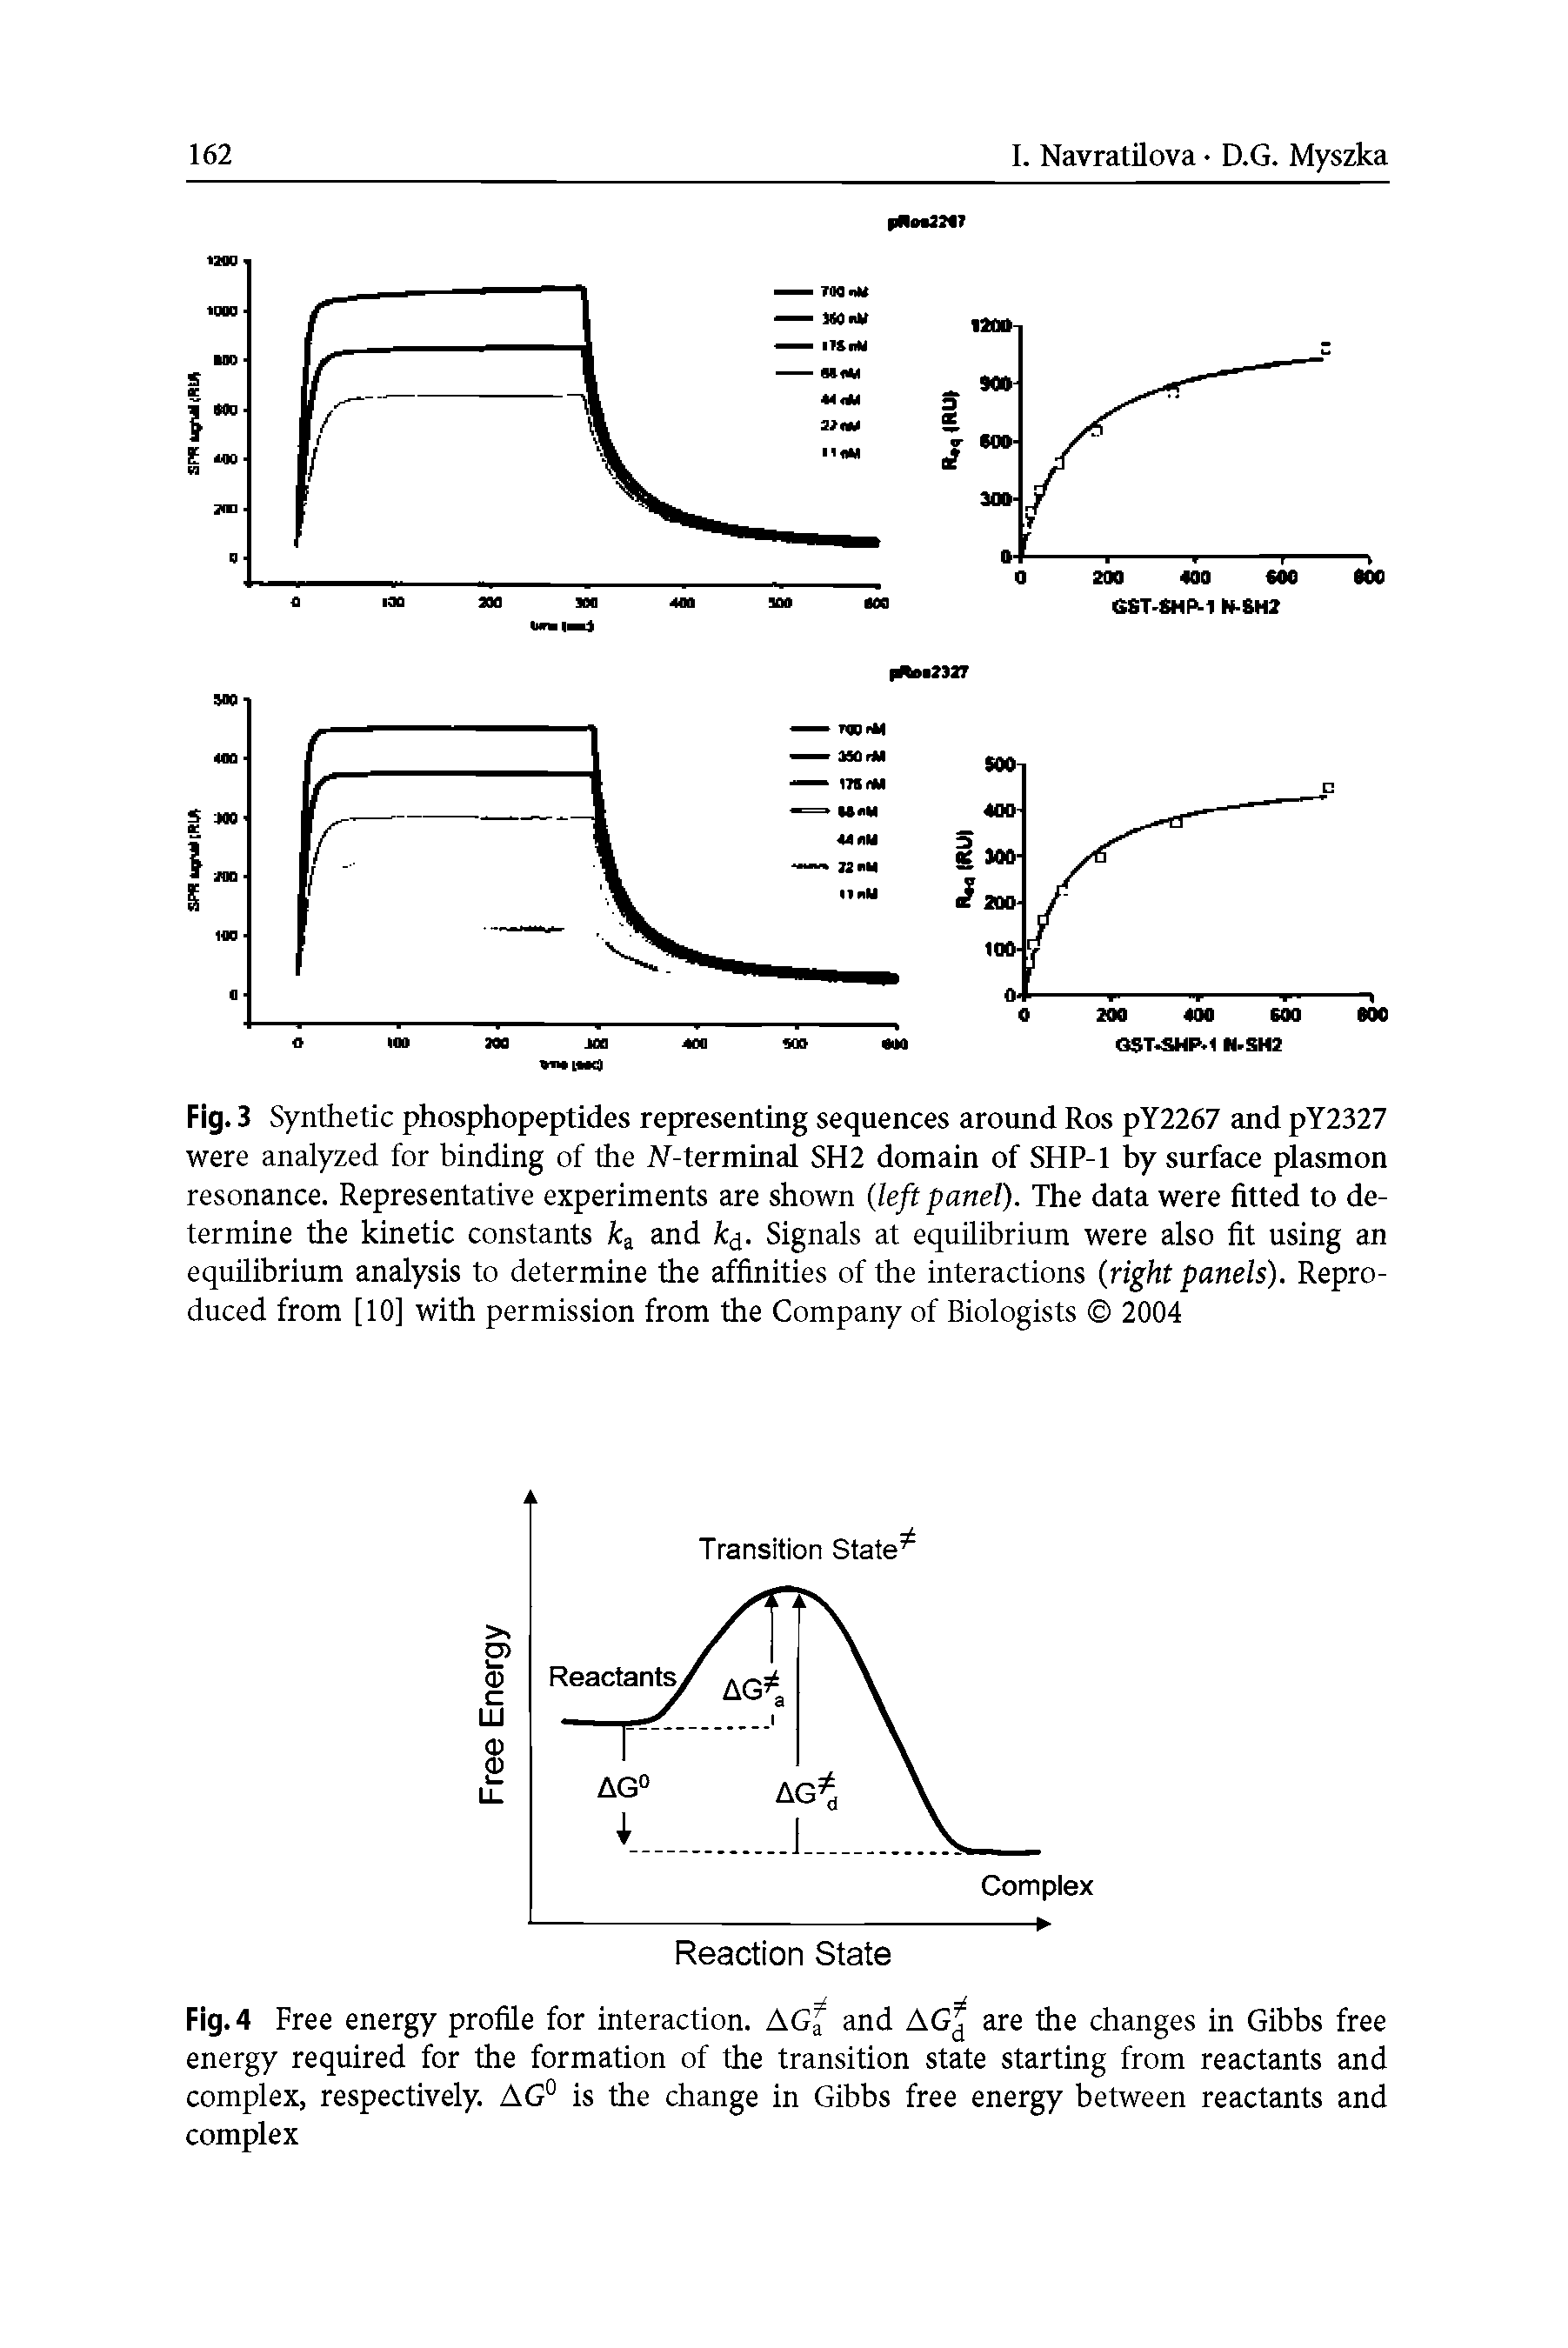 Fig. 4 Free energy profile for interaction. Acf and AG are the changes in Gibbs free energy required for the formation of the transition state starting from reactants and complex, respectively. AG° is the change in Gibbs free energy between reactants and complex...